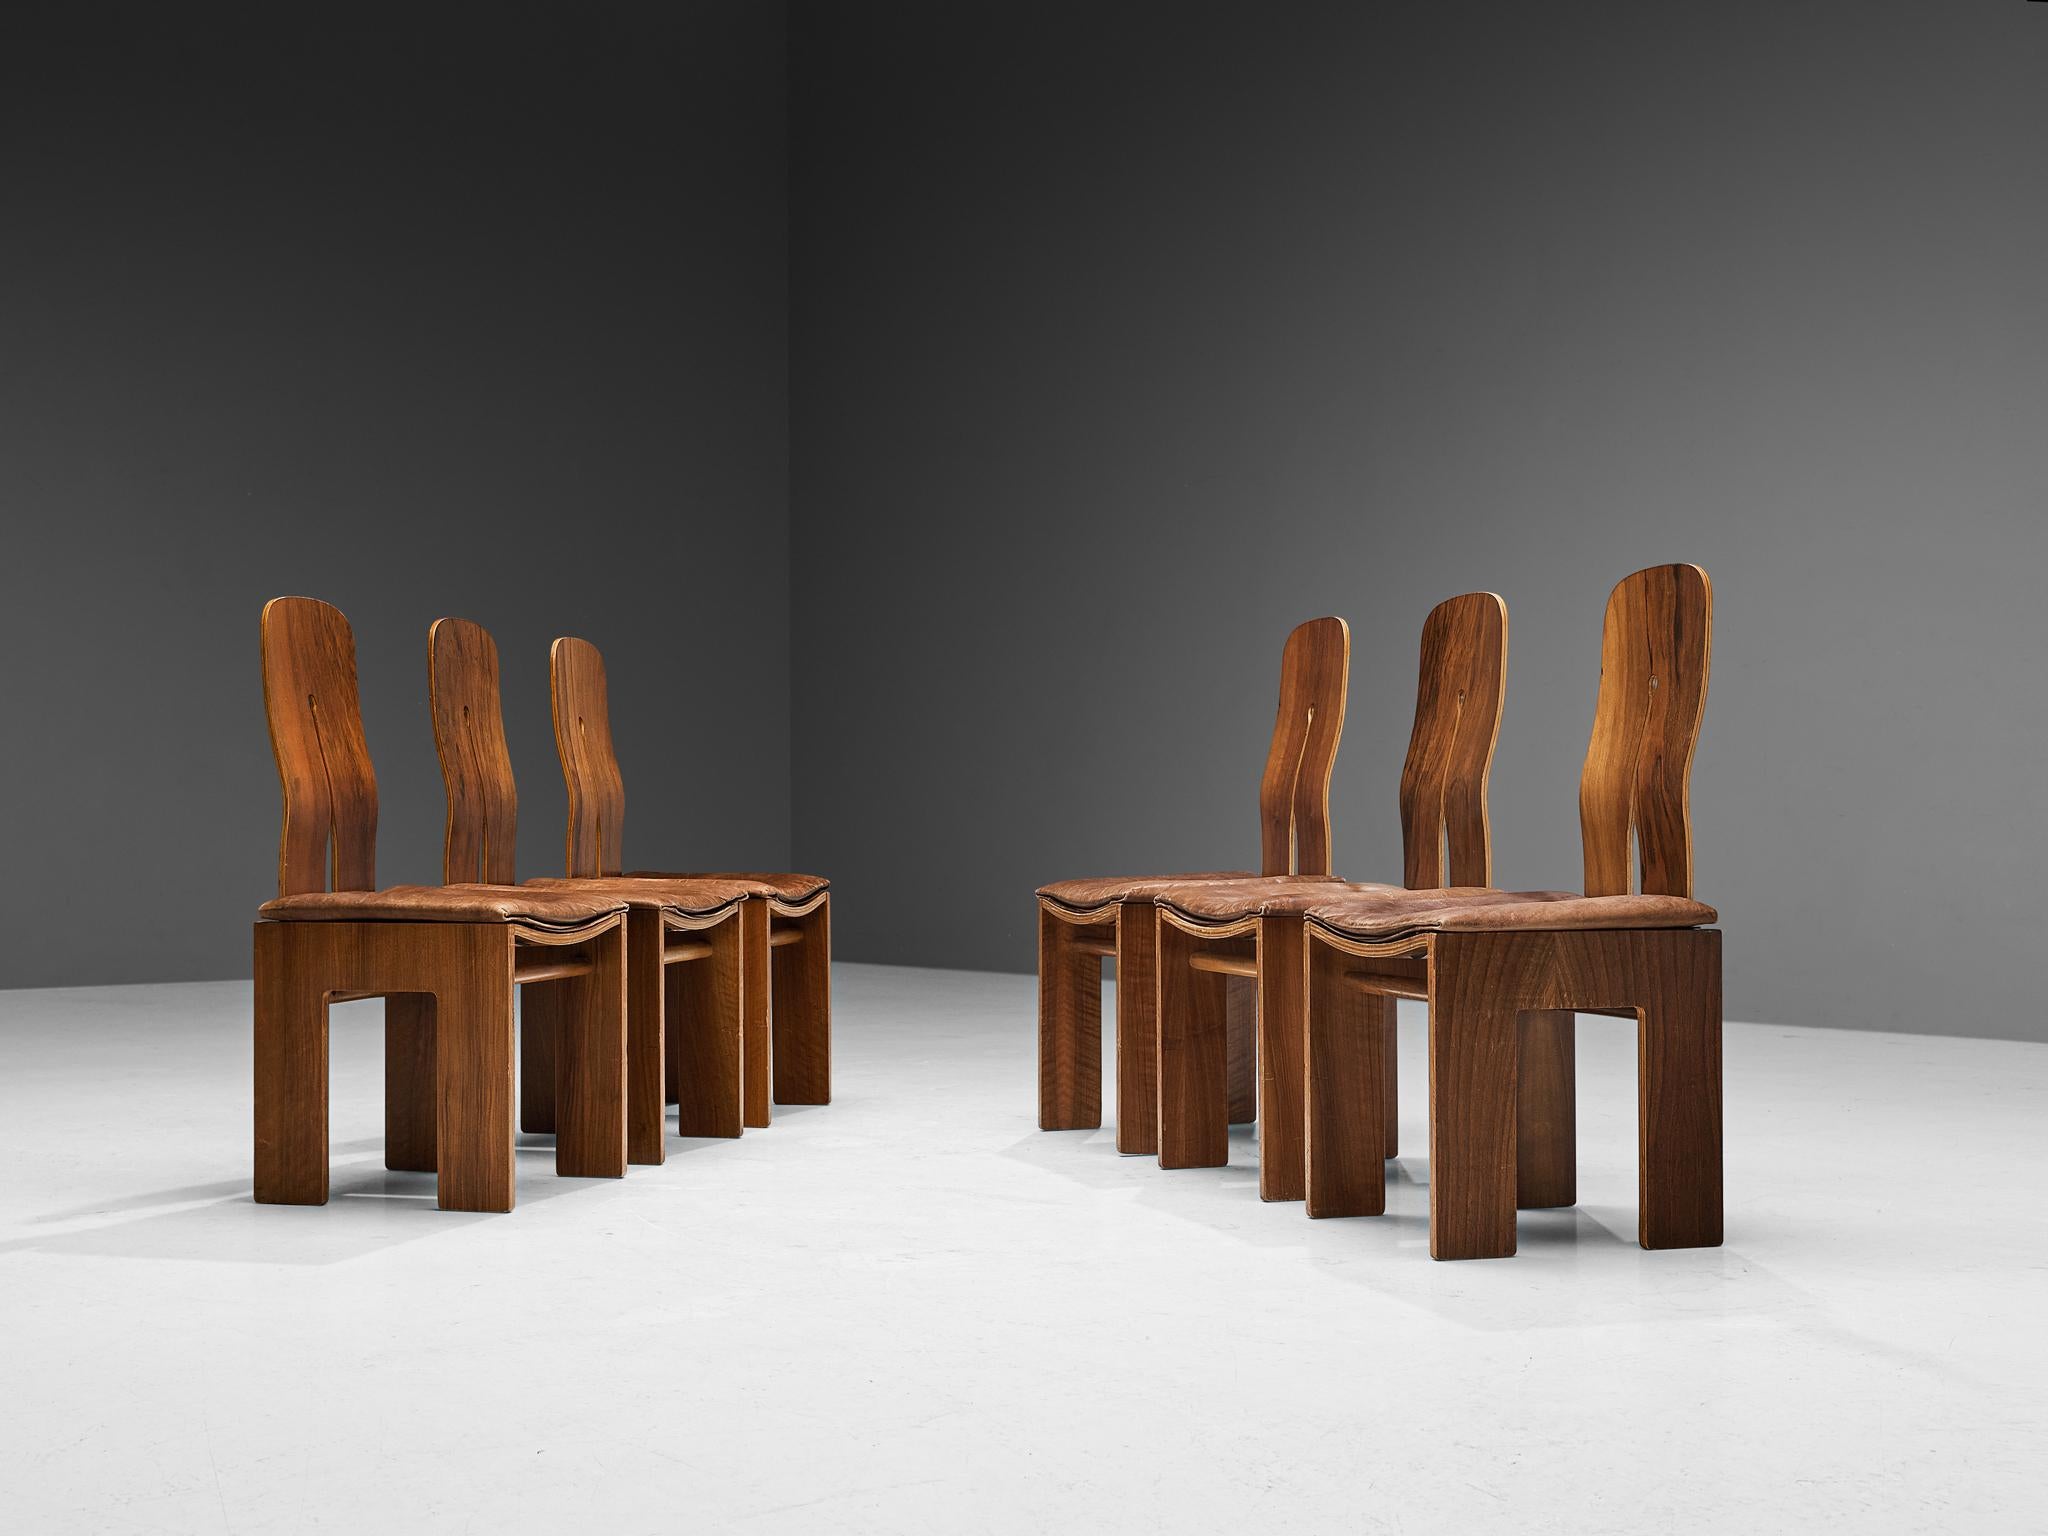 Carlo Scarpa for Bernini, set of six dining chairs model '765', walnut, leather, designed in 1934, produced in 1977. 

These well-proportioned chairs are designed by Carlo Scarpa in 1934, a design that was not produced until 1977. He exclusively